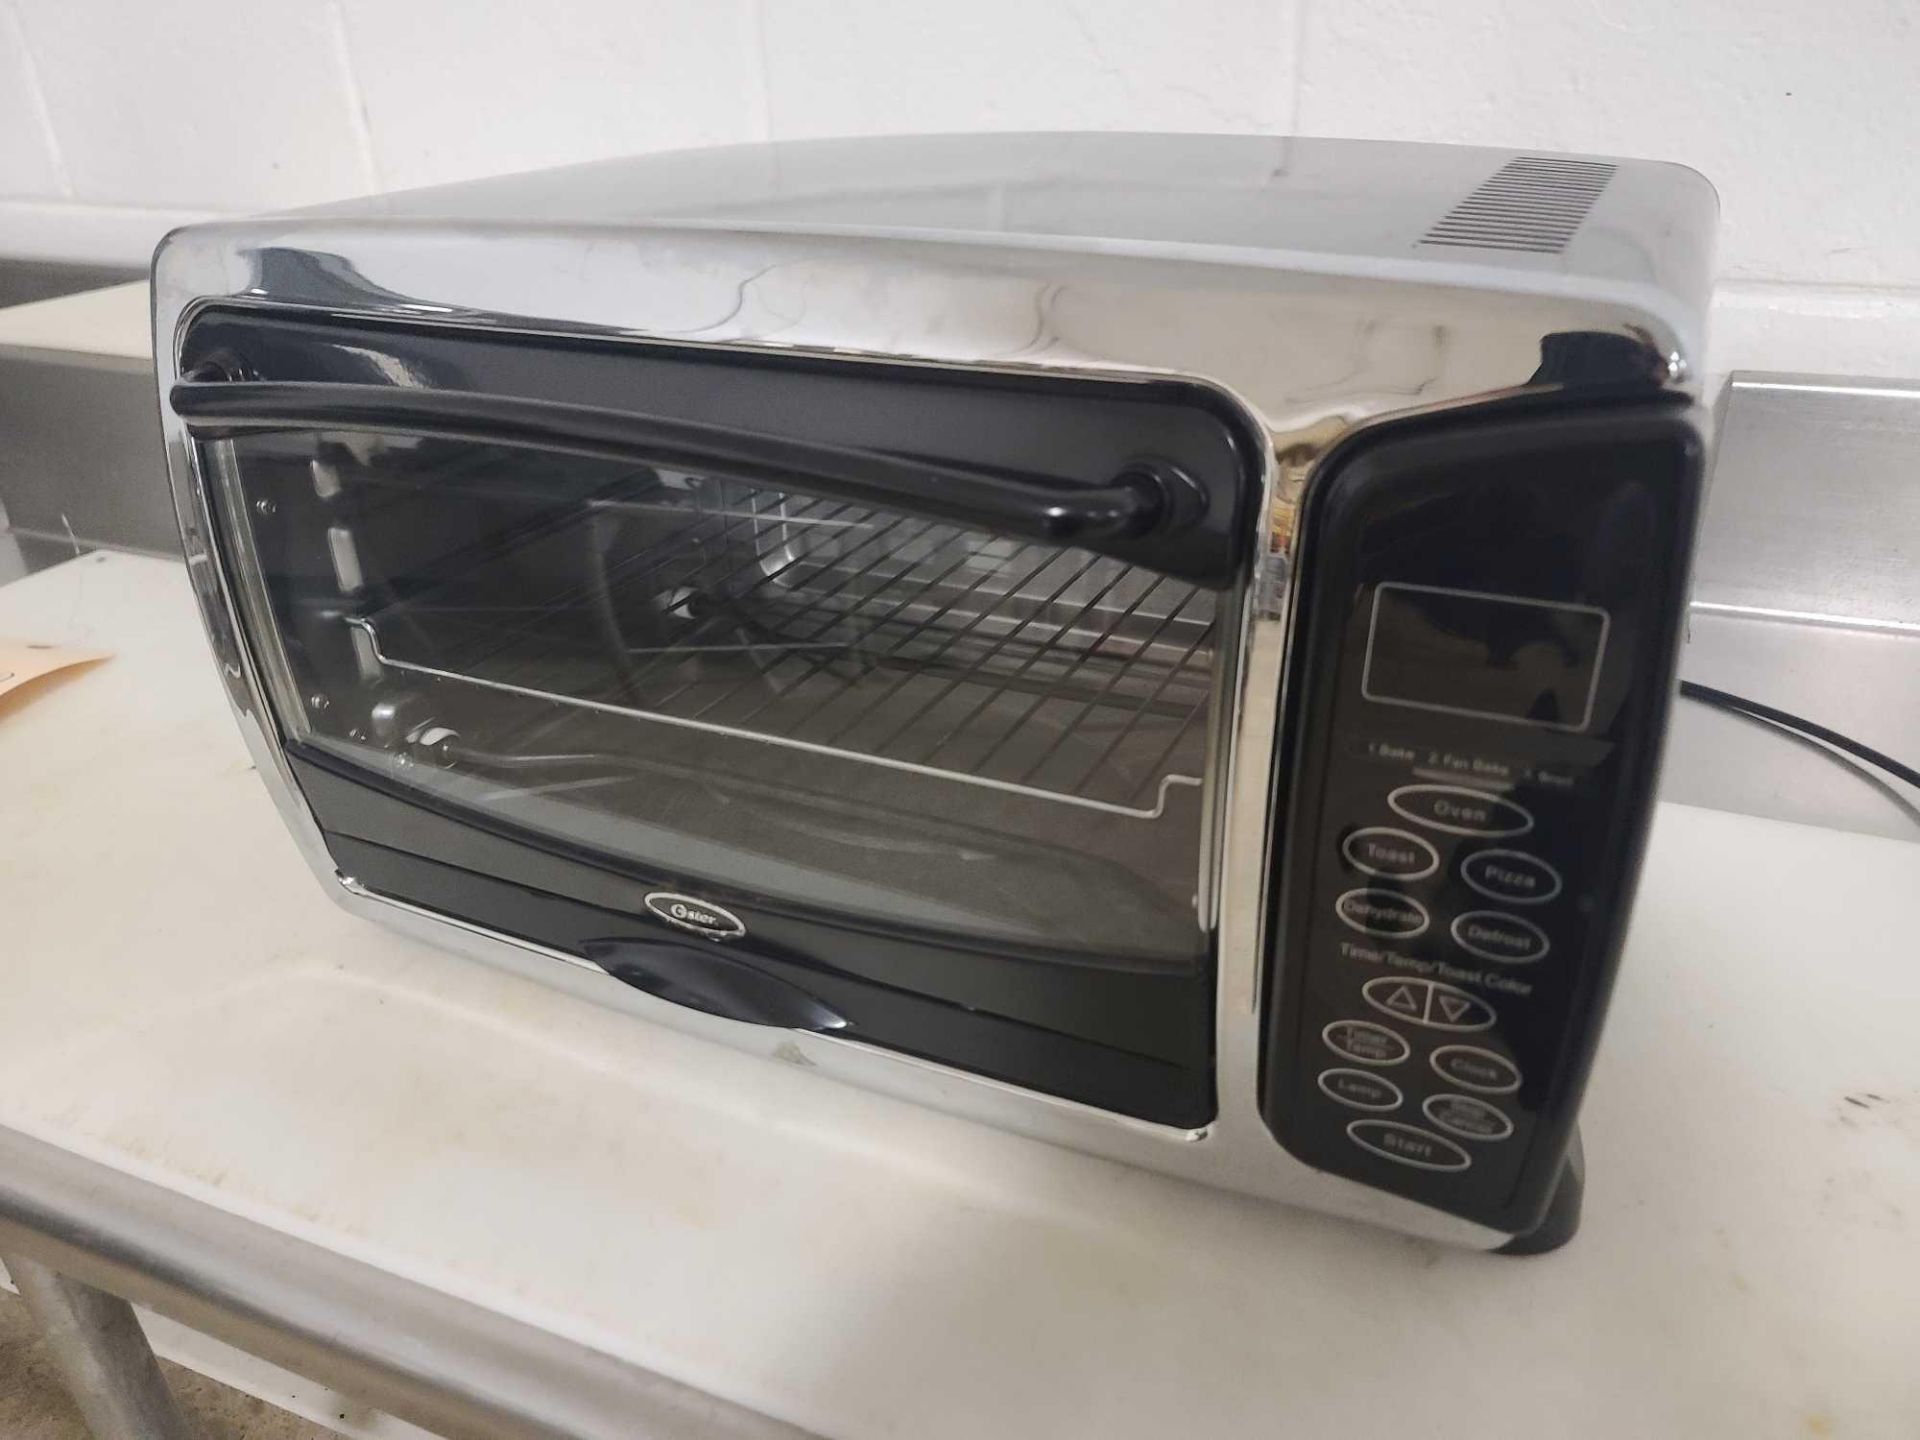 Oster 6057-000 Toaster Oven - Image 2 of 6